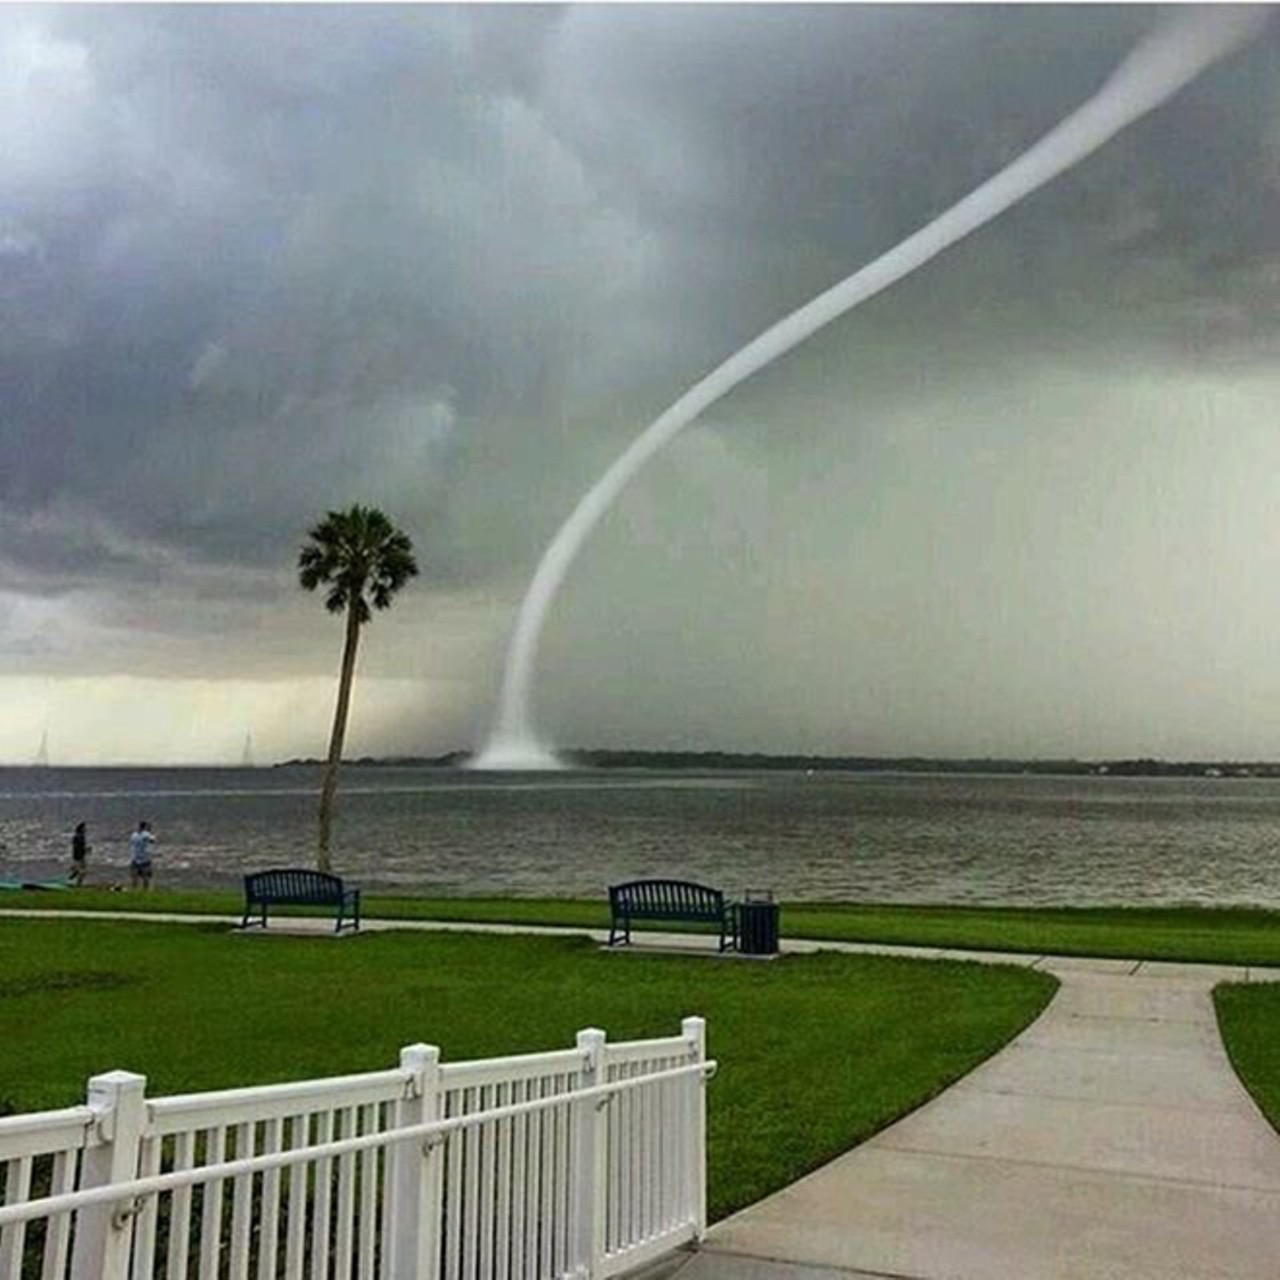 You could get pummeled by a water spout and die in a watery plume of terror.
Photo via Instagram user 305ssom